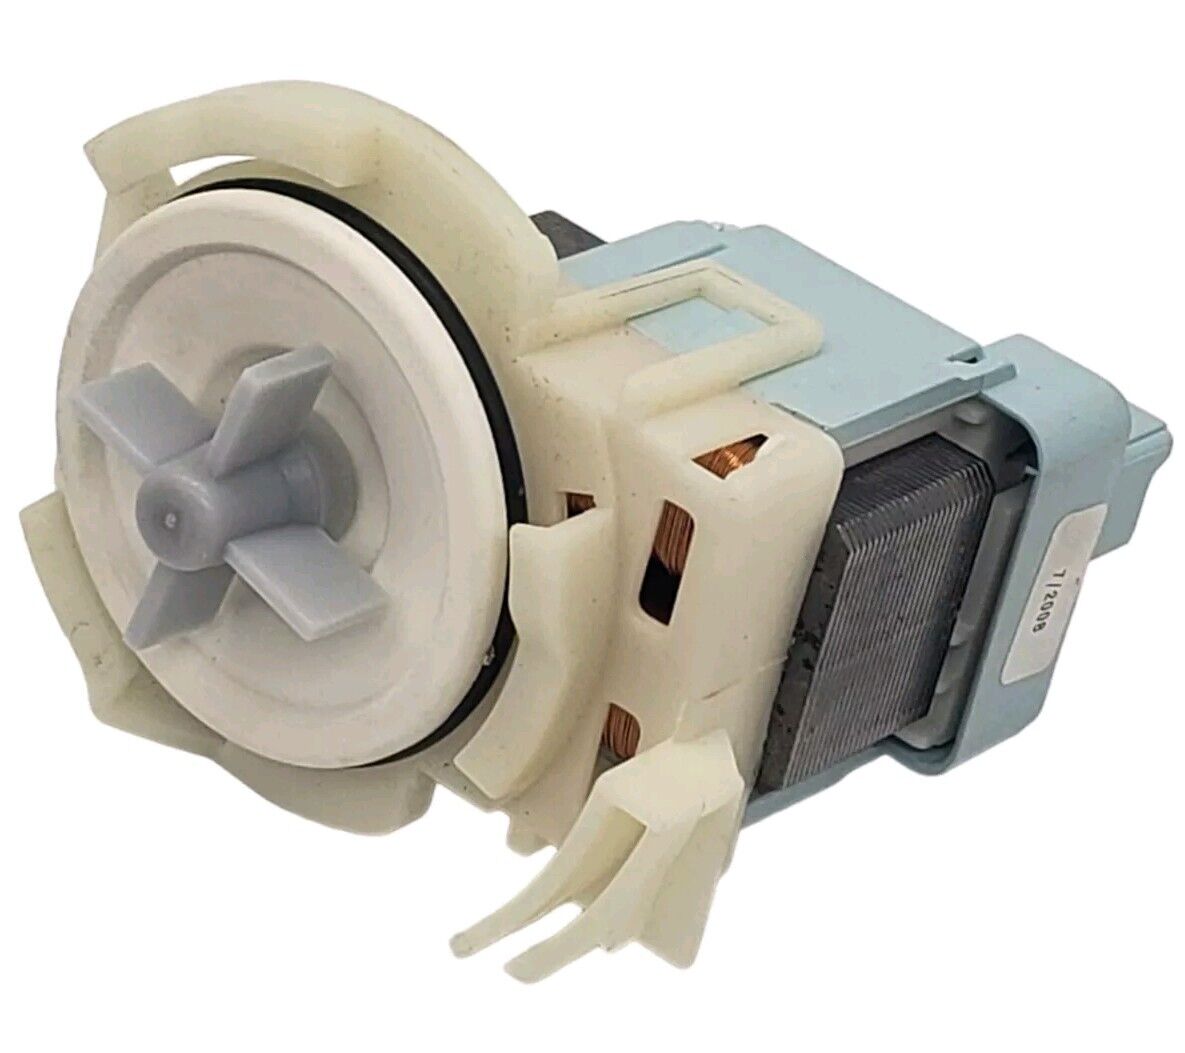 Replacement for Kenmore Dishwasher Drain Pump 8565839